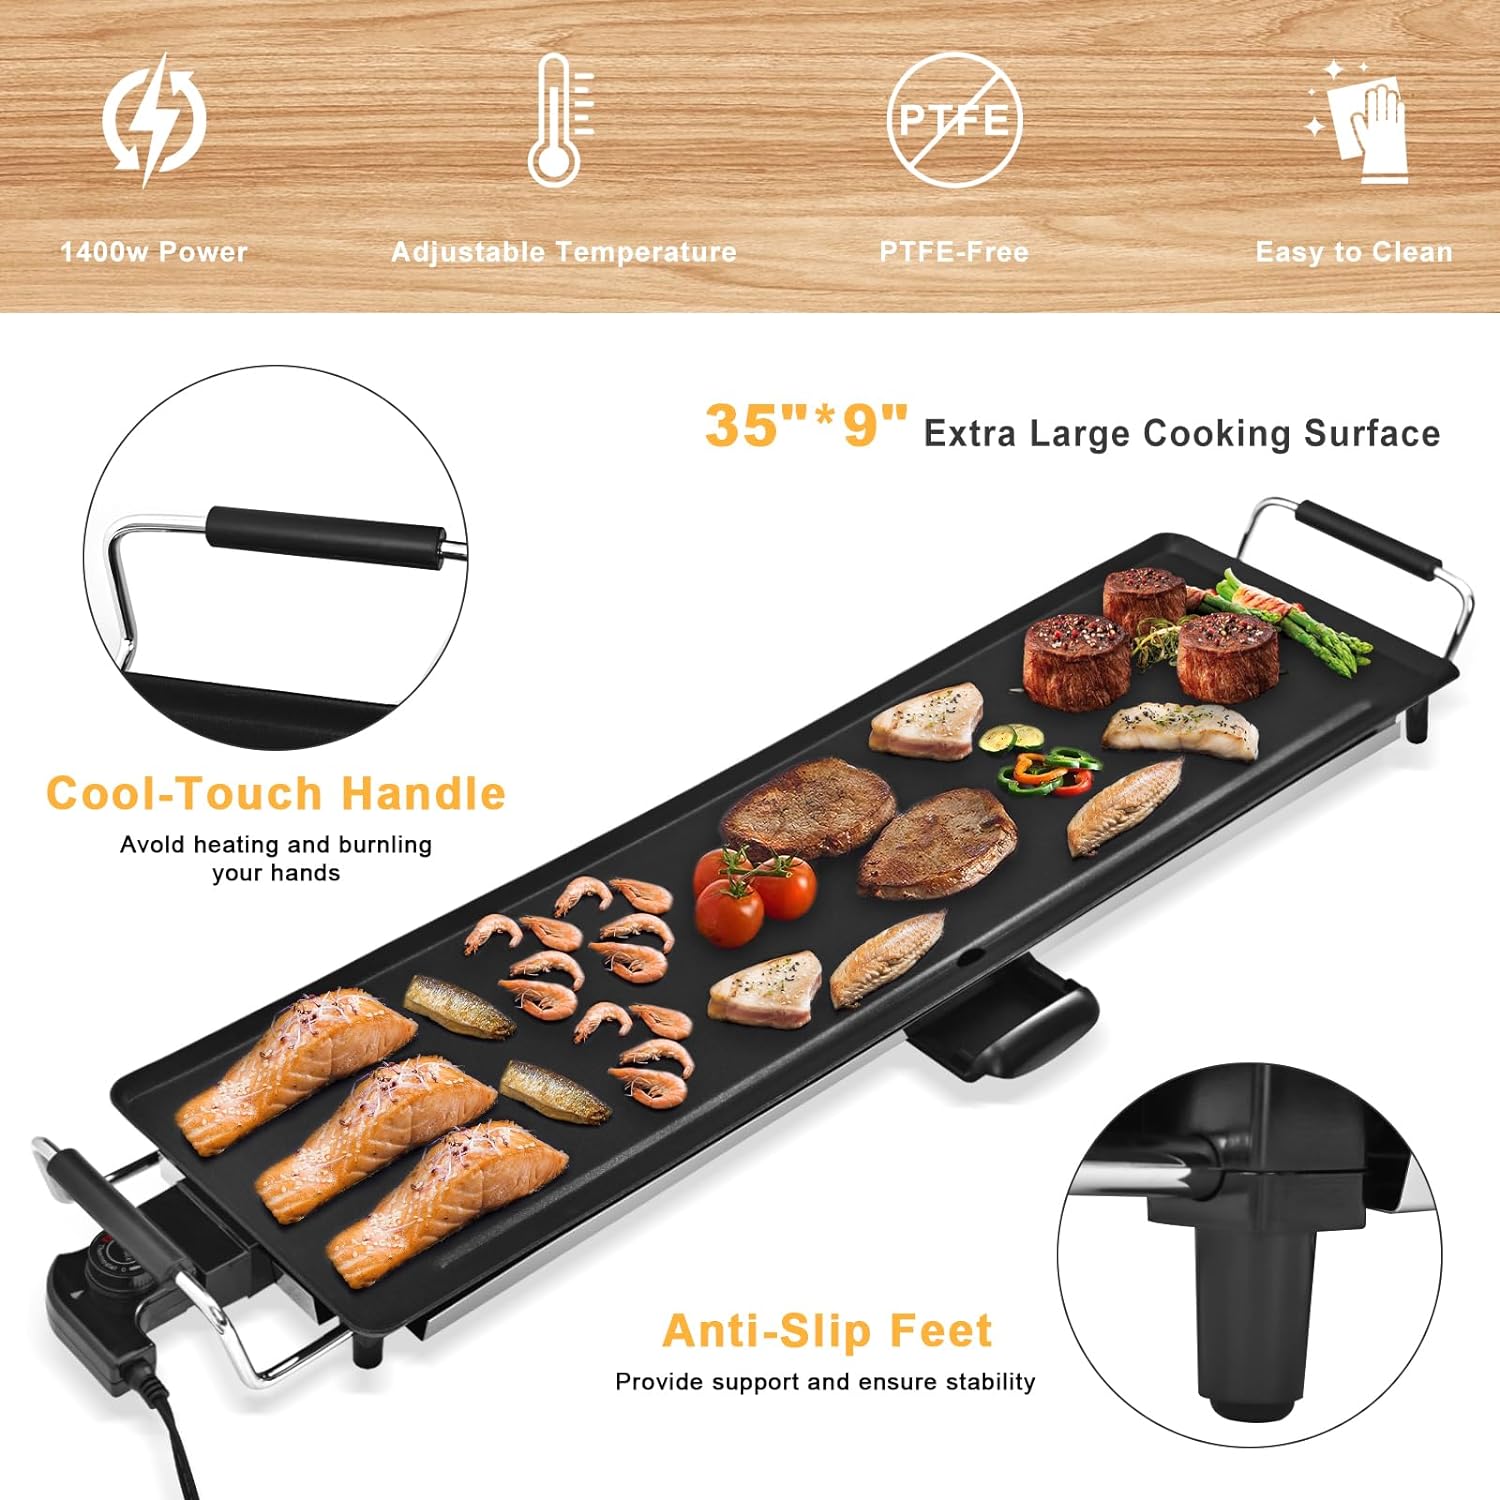 AEWHALE Electric Nonstick Extra Larger Griddle Grill-35 Teppanyaki Grill BBQ with Adjustable Temperature Insulated Handles for Indoor/Outdoor